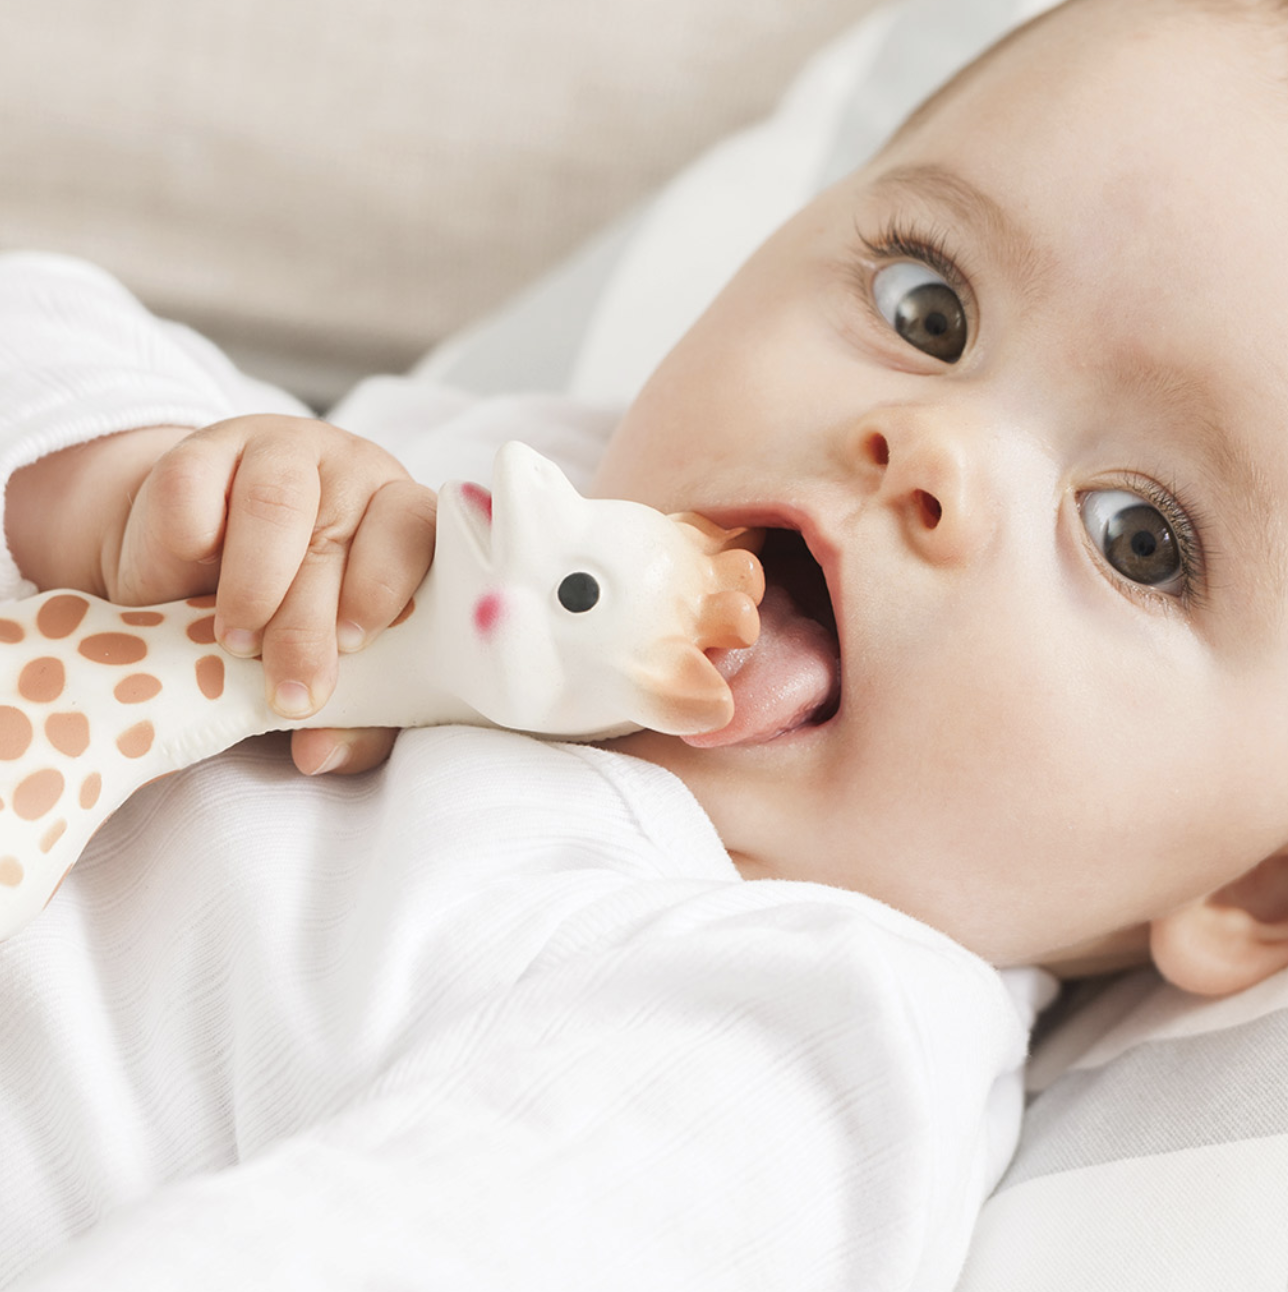 A baby with a Sophie the Giraffe teether